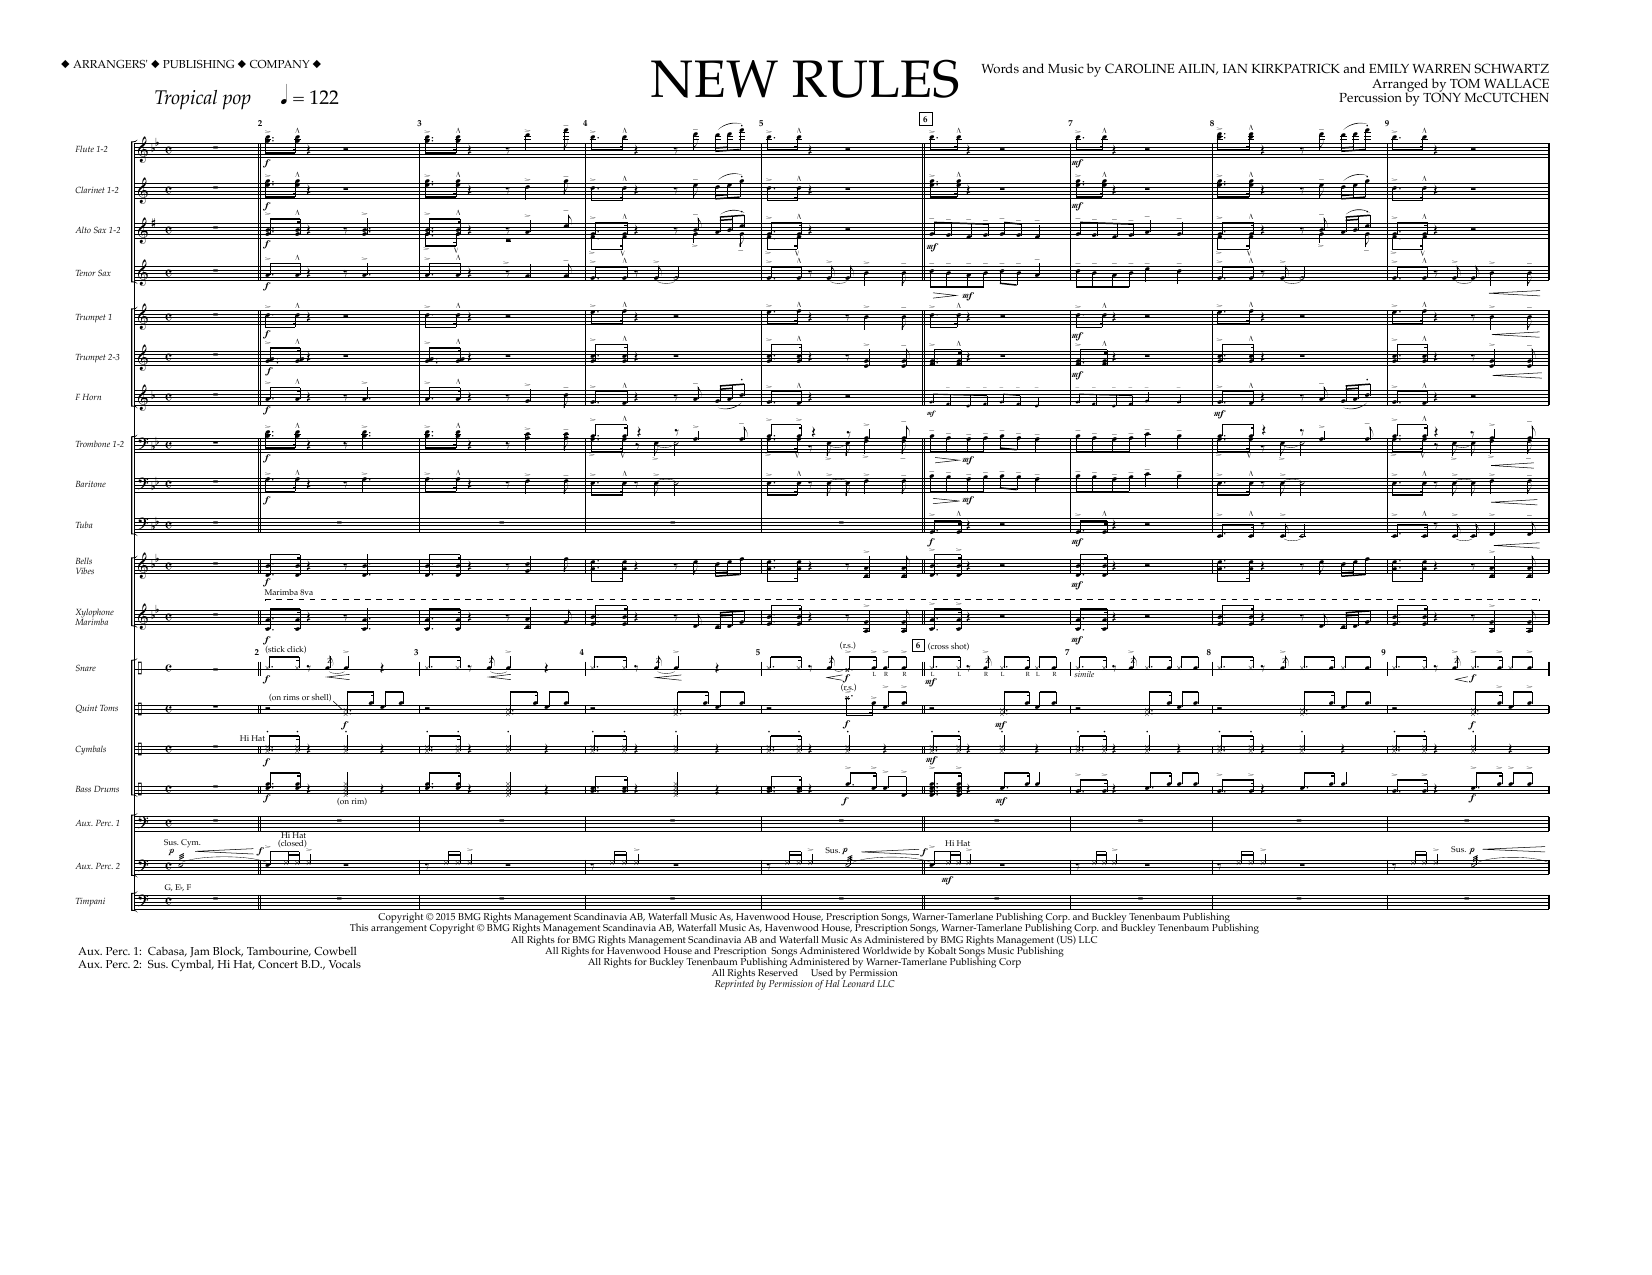 Download Tom Wallace New Rules - Full Score Sheet Music